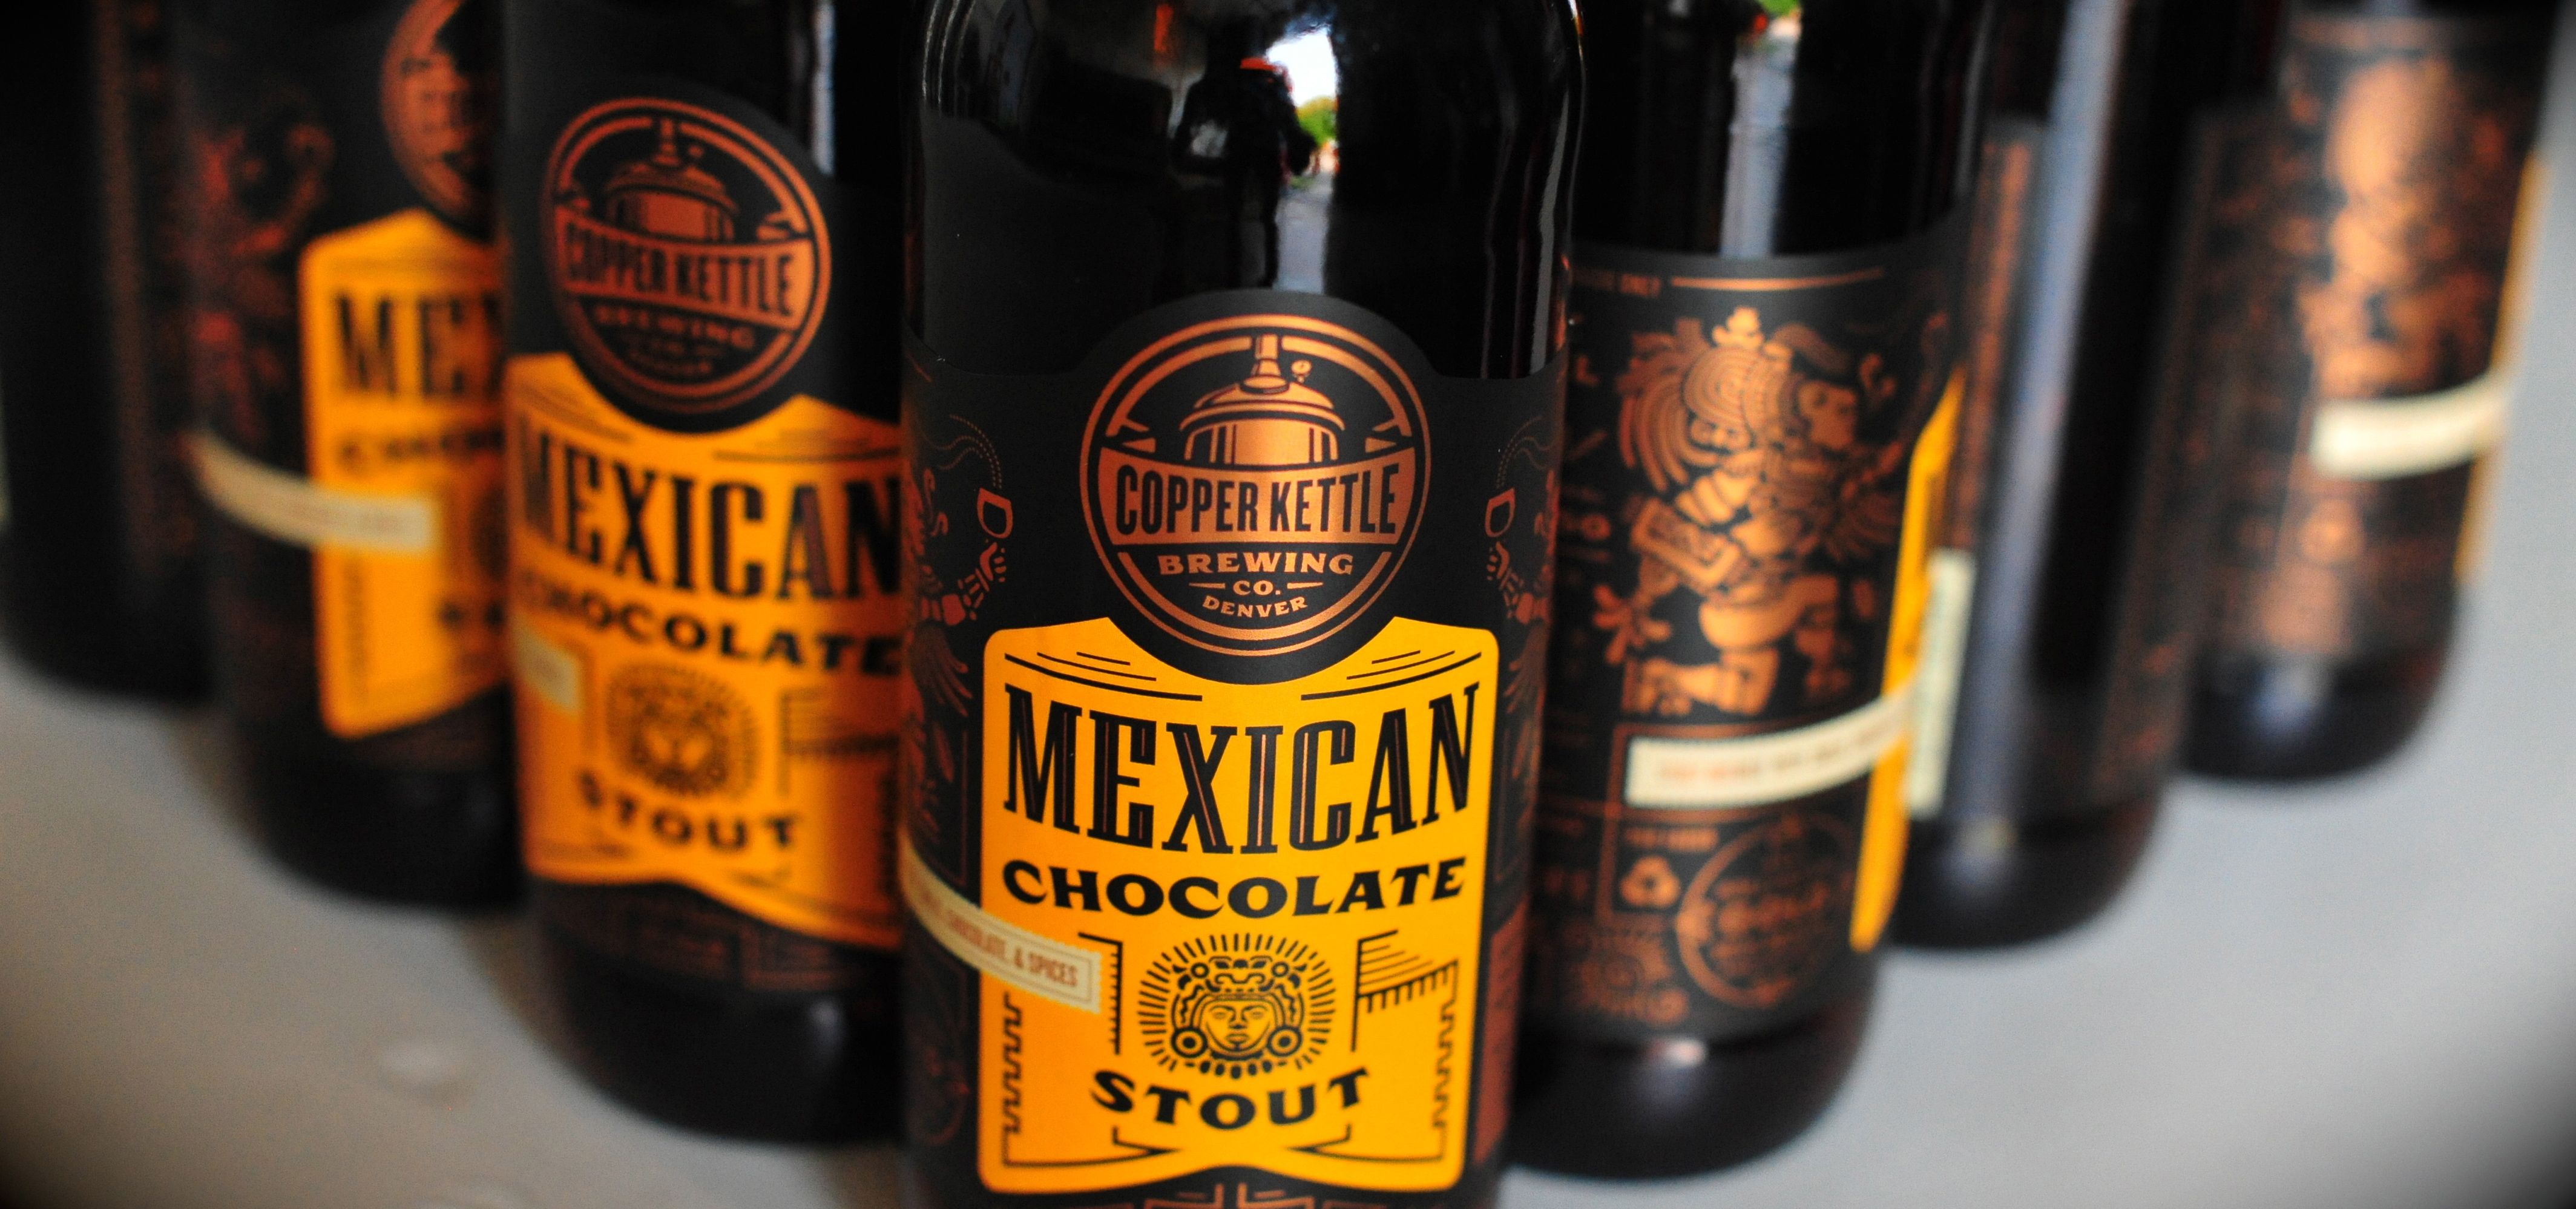 Copper Kettle Mexican Chocolate Stout Bottle Release